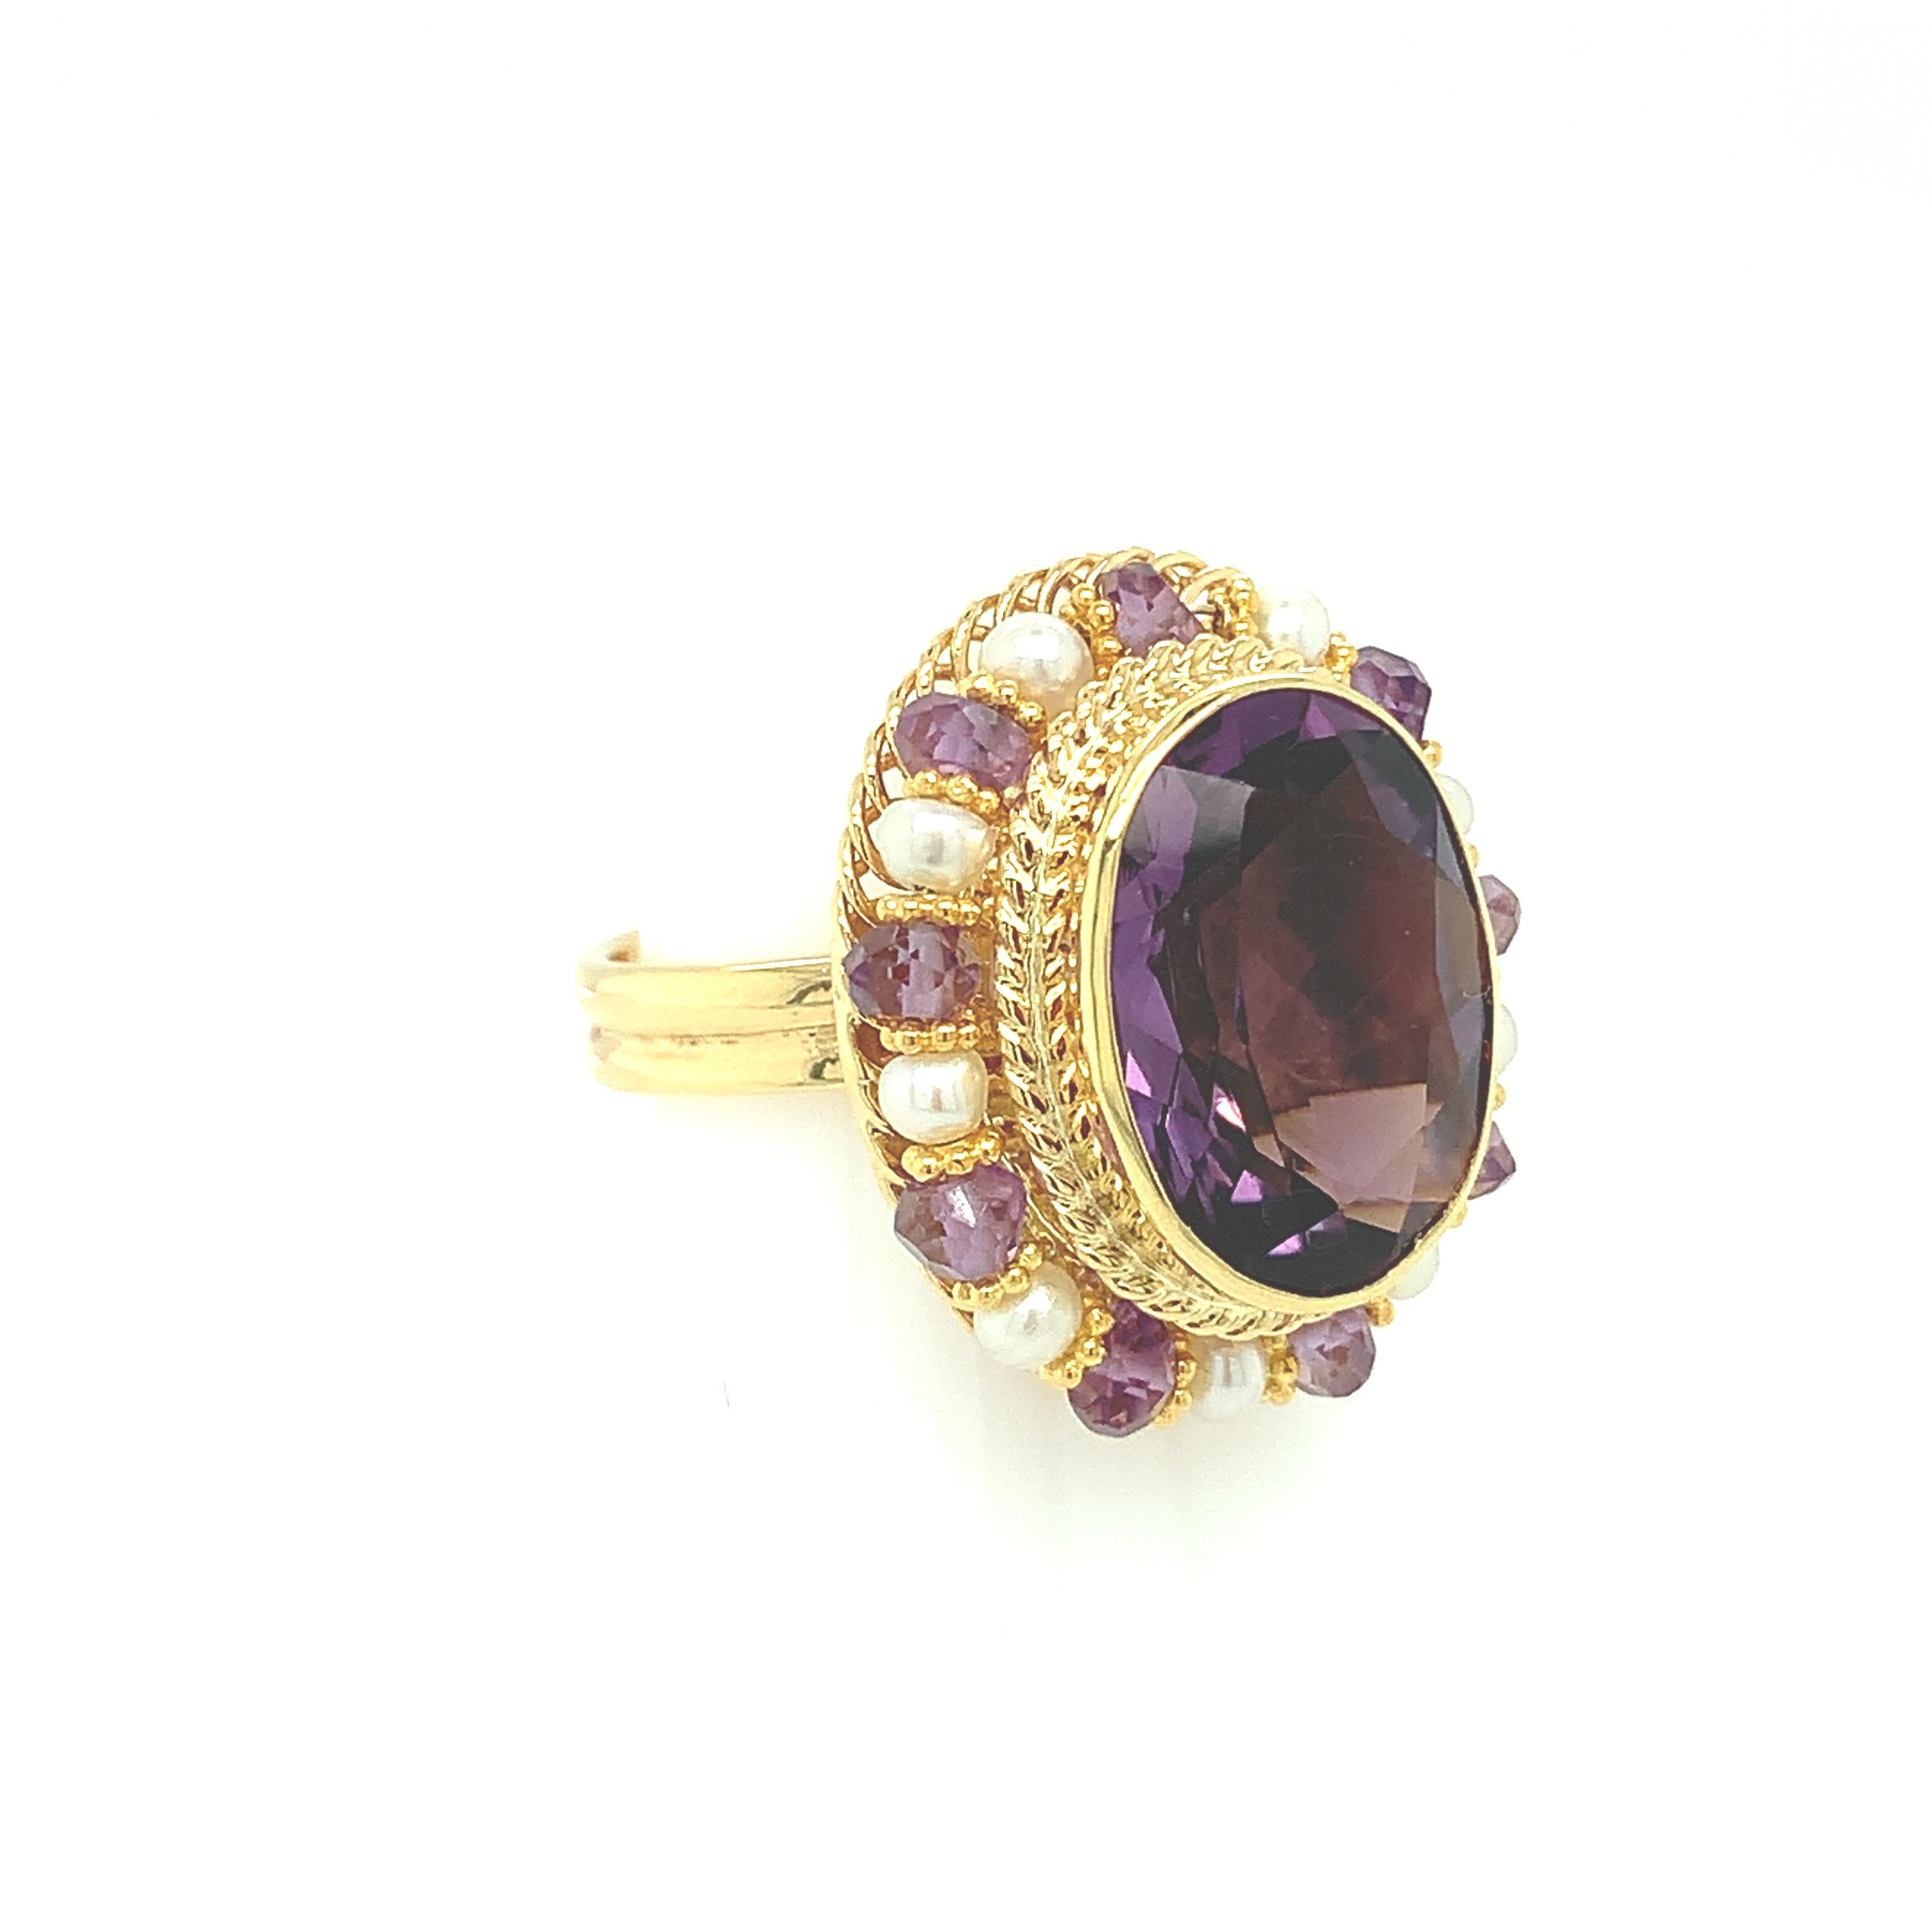 Oval Cut Amethyst Oval, Seed Pearl, Amethyst Bead Yellow Gold Filigree Cocktail Ring  